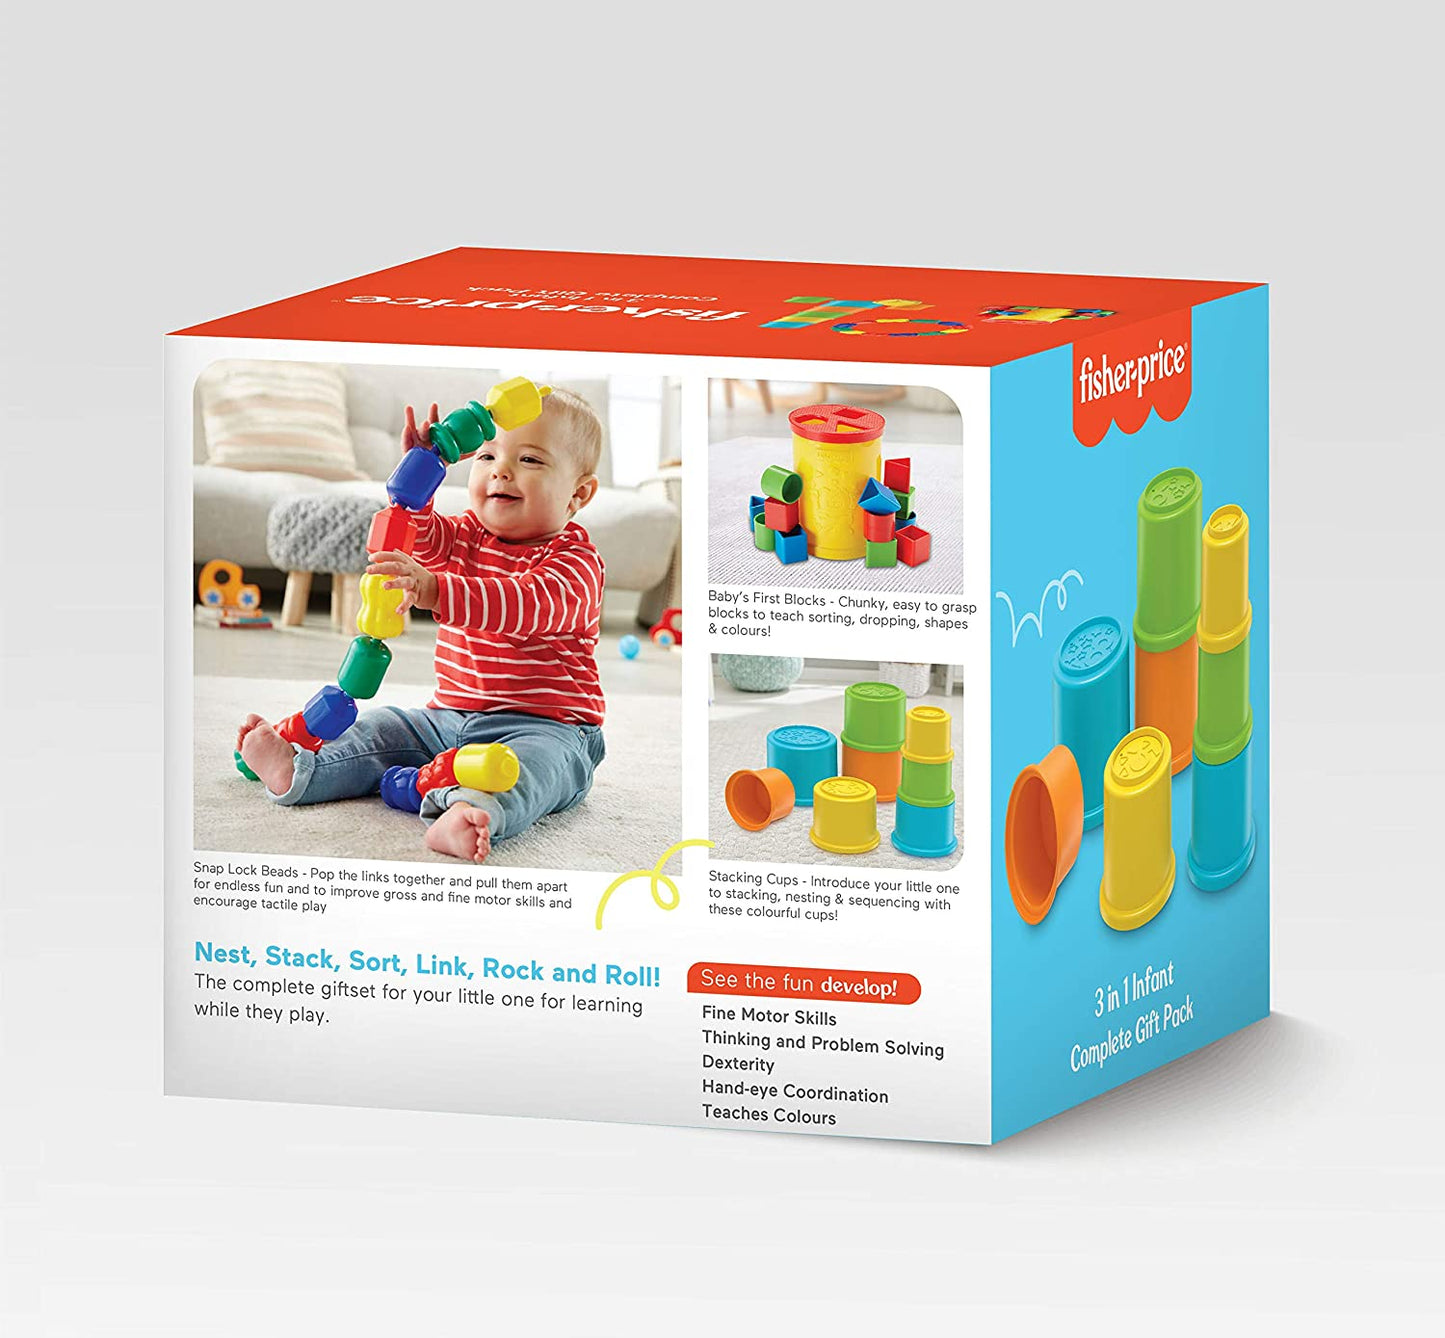 Buy Fisher Price 3-in-1 Infant Complete Gift Pack online at Best Price in India from kiddiewonderland.in. Explore Fast and free delivery across India with special discount offers. 